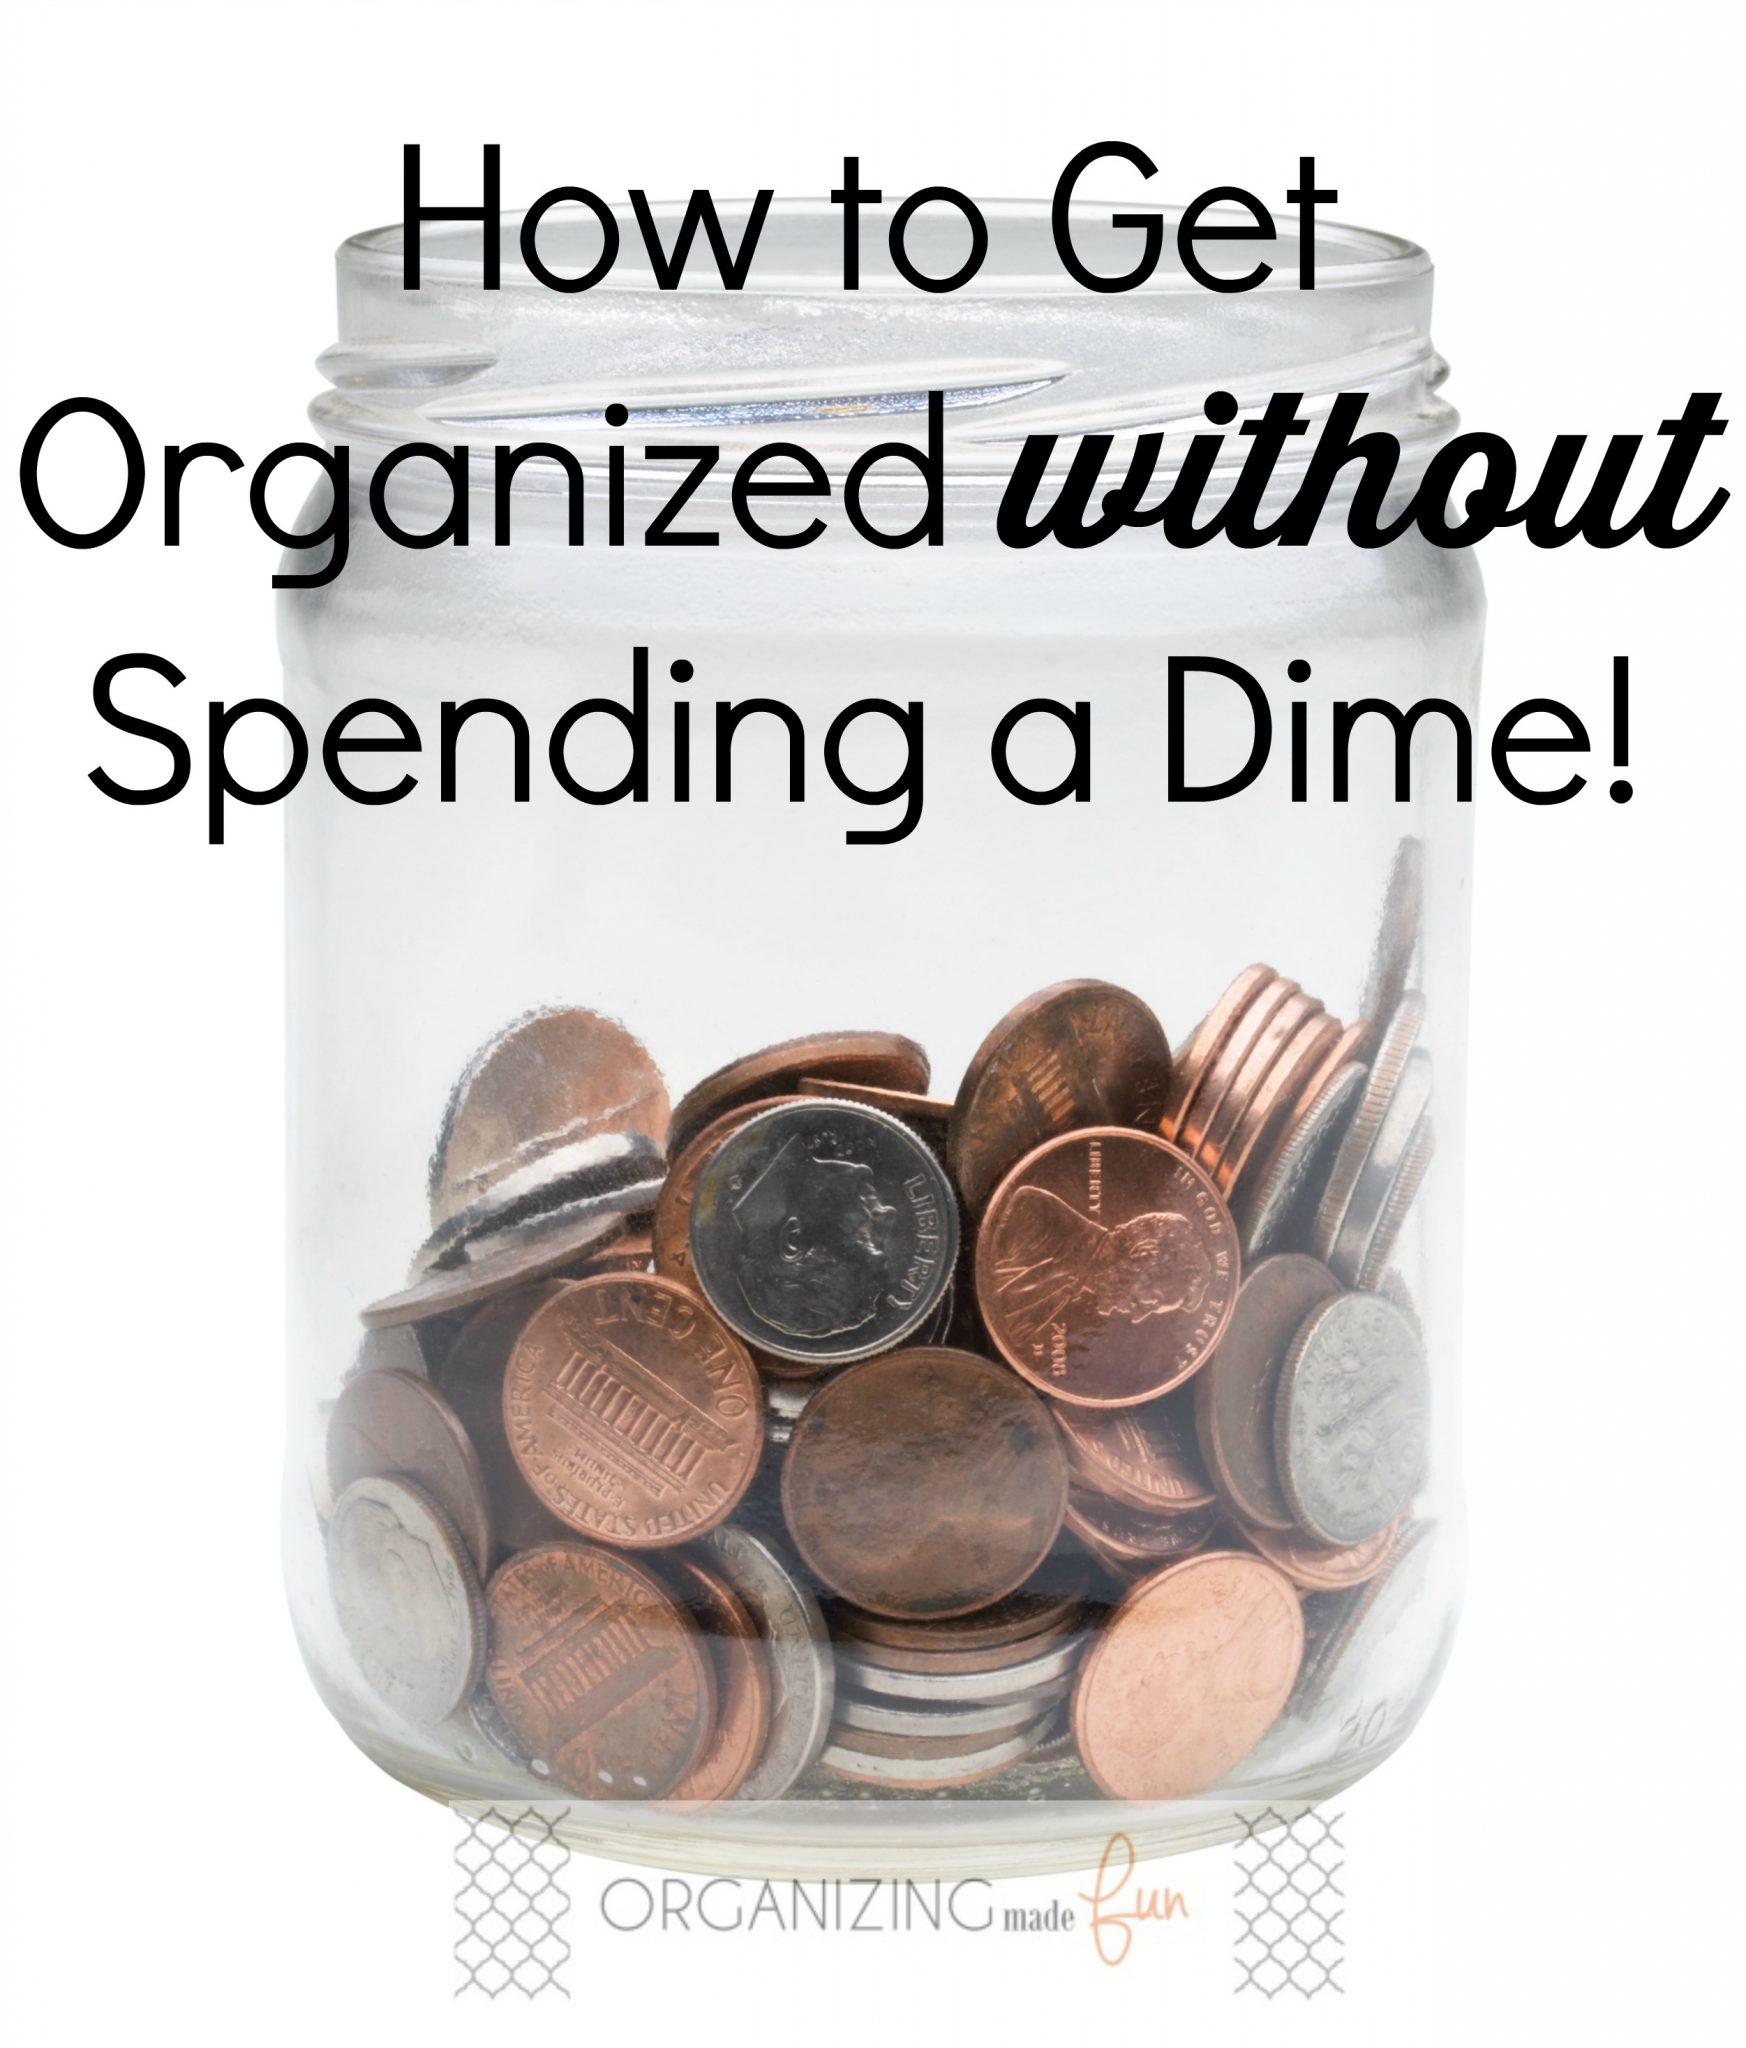 How to organize your home without spending any money – 8 pro tips